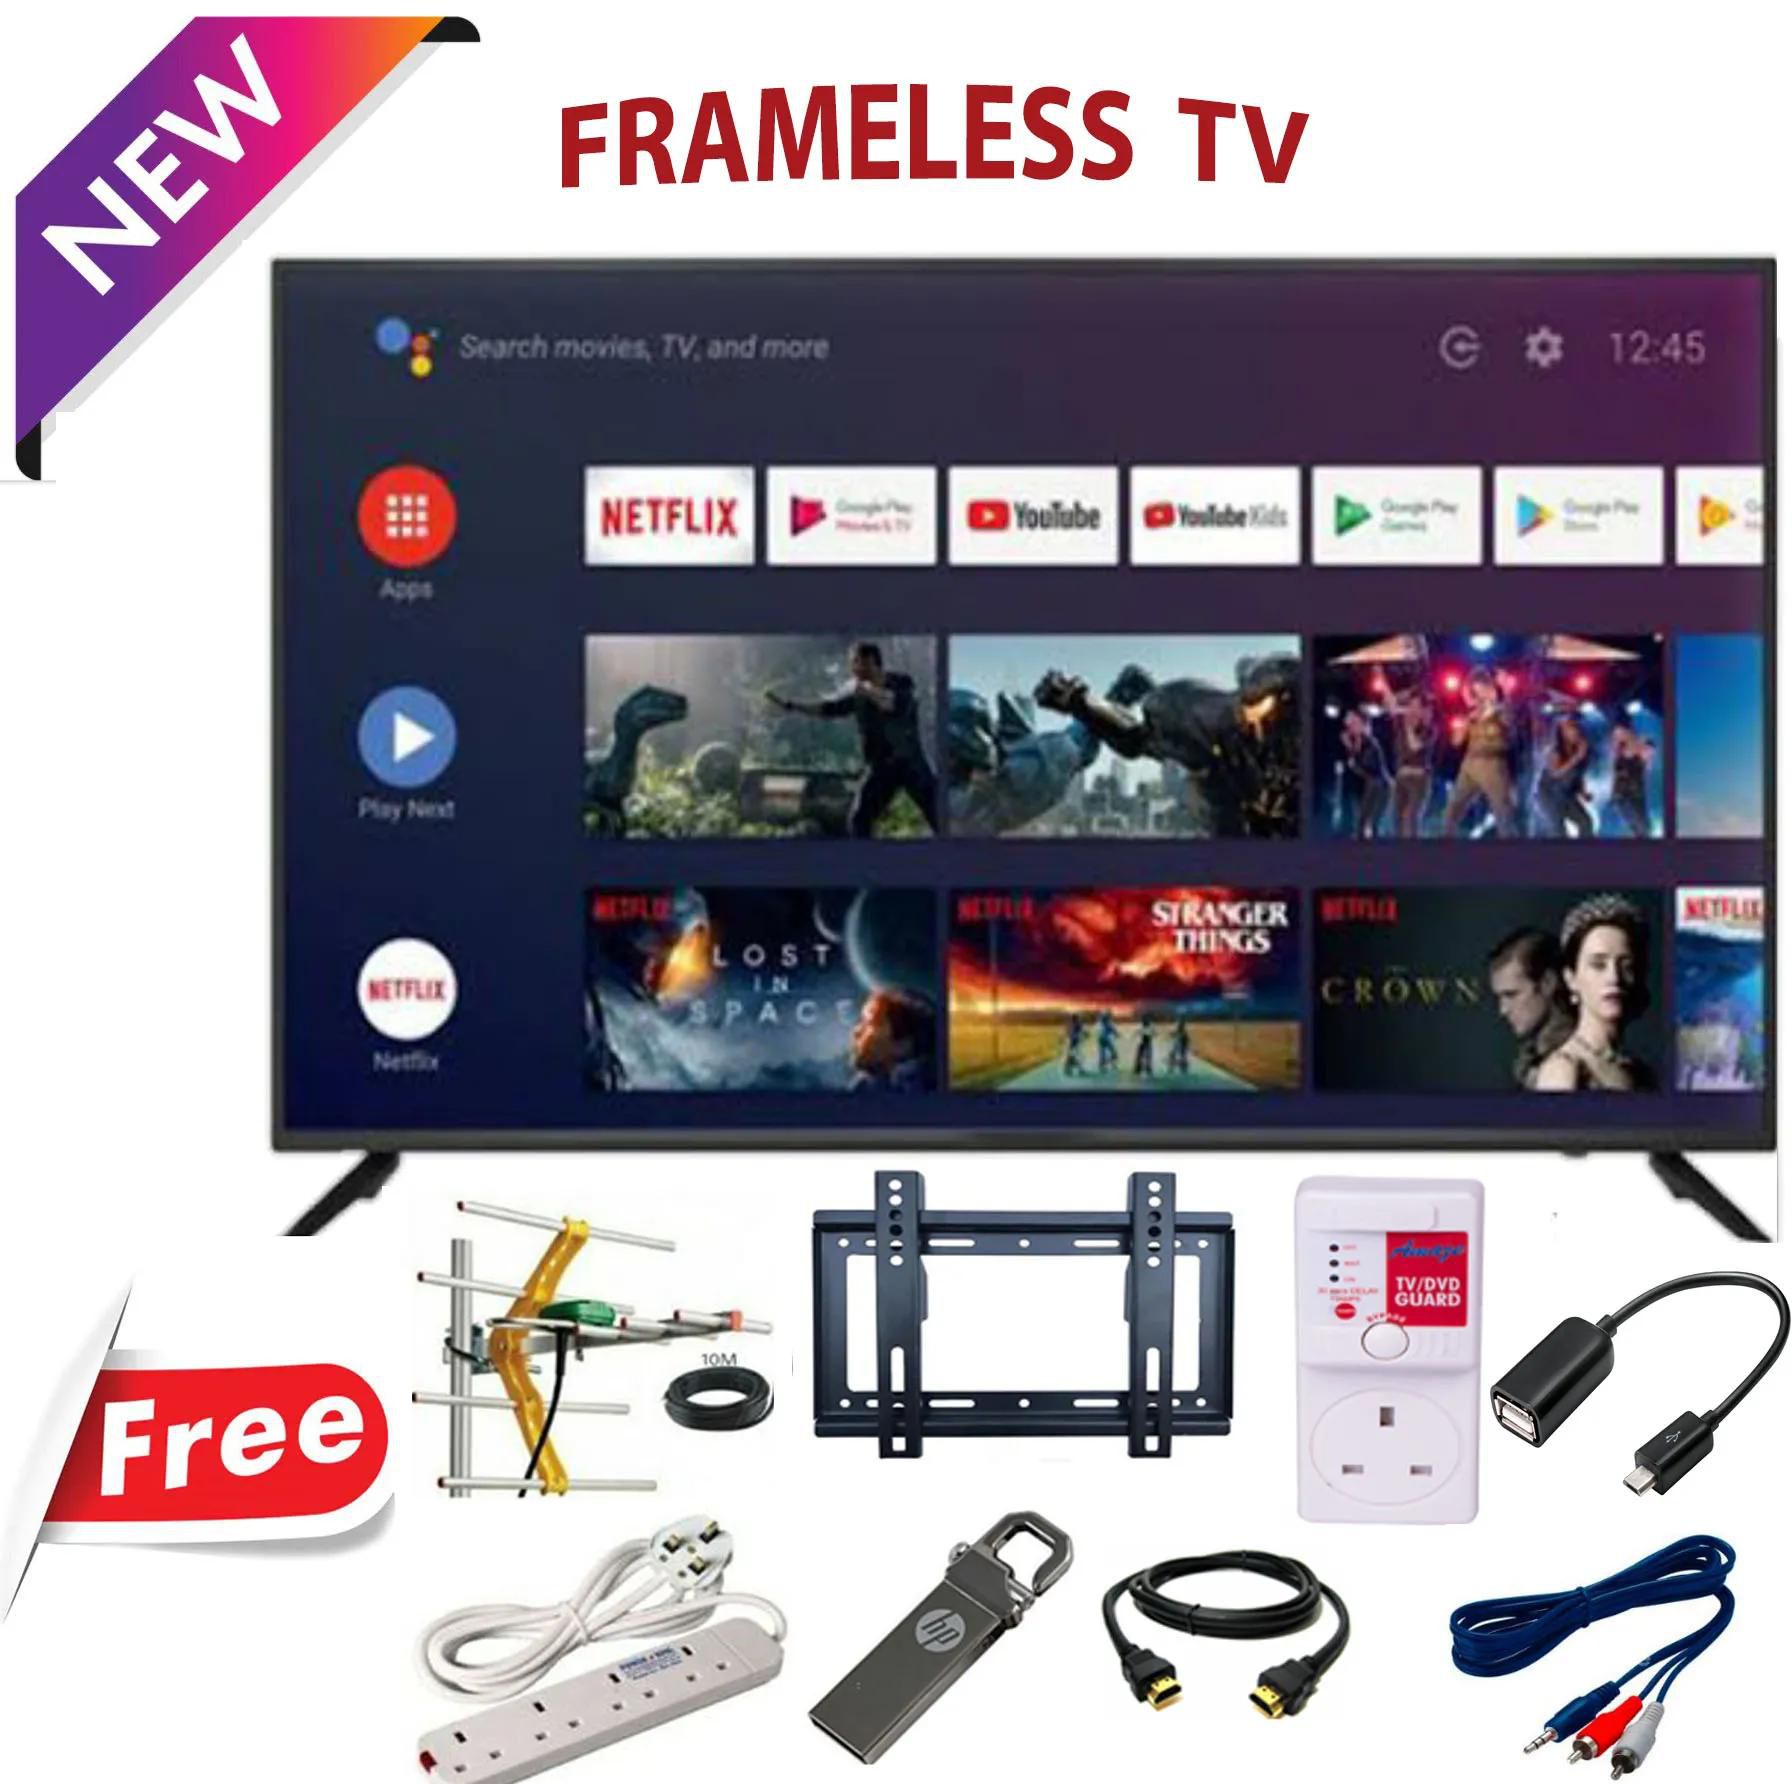 [Best Bundle] VITRON 4388FS -43" inch Smart TV Android Television Full HD Frameless TV with Netflix Youtube Television